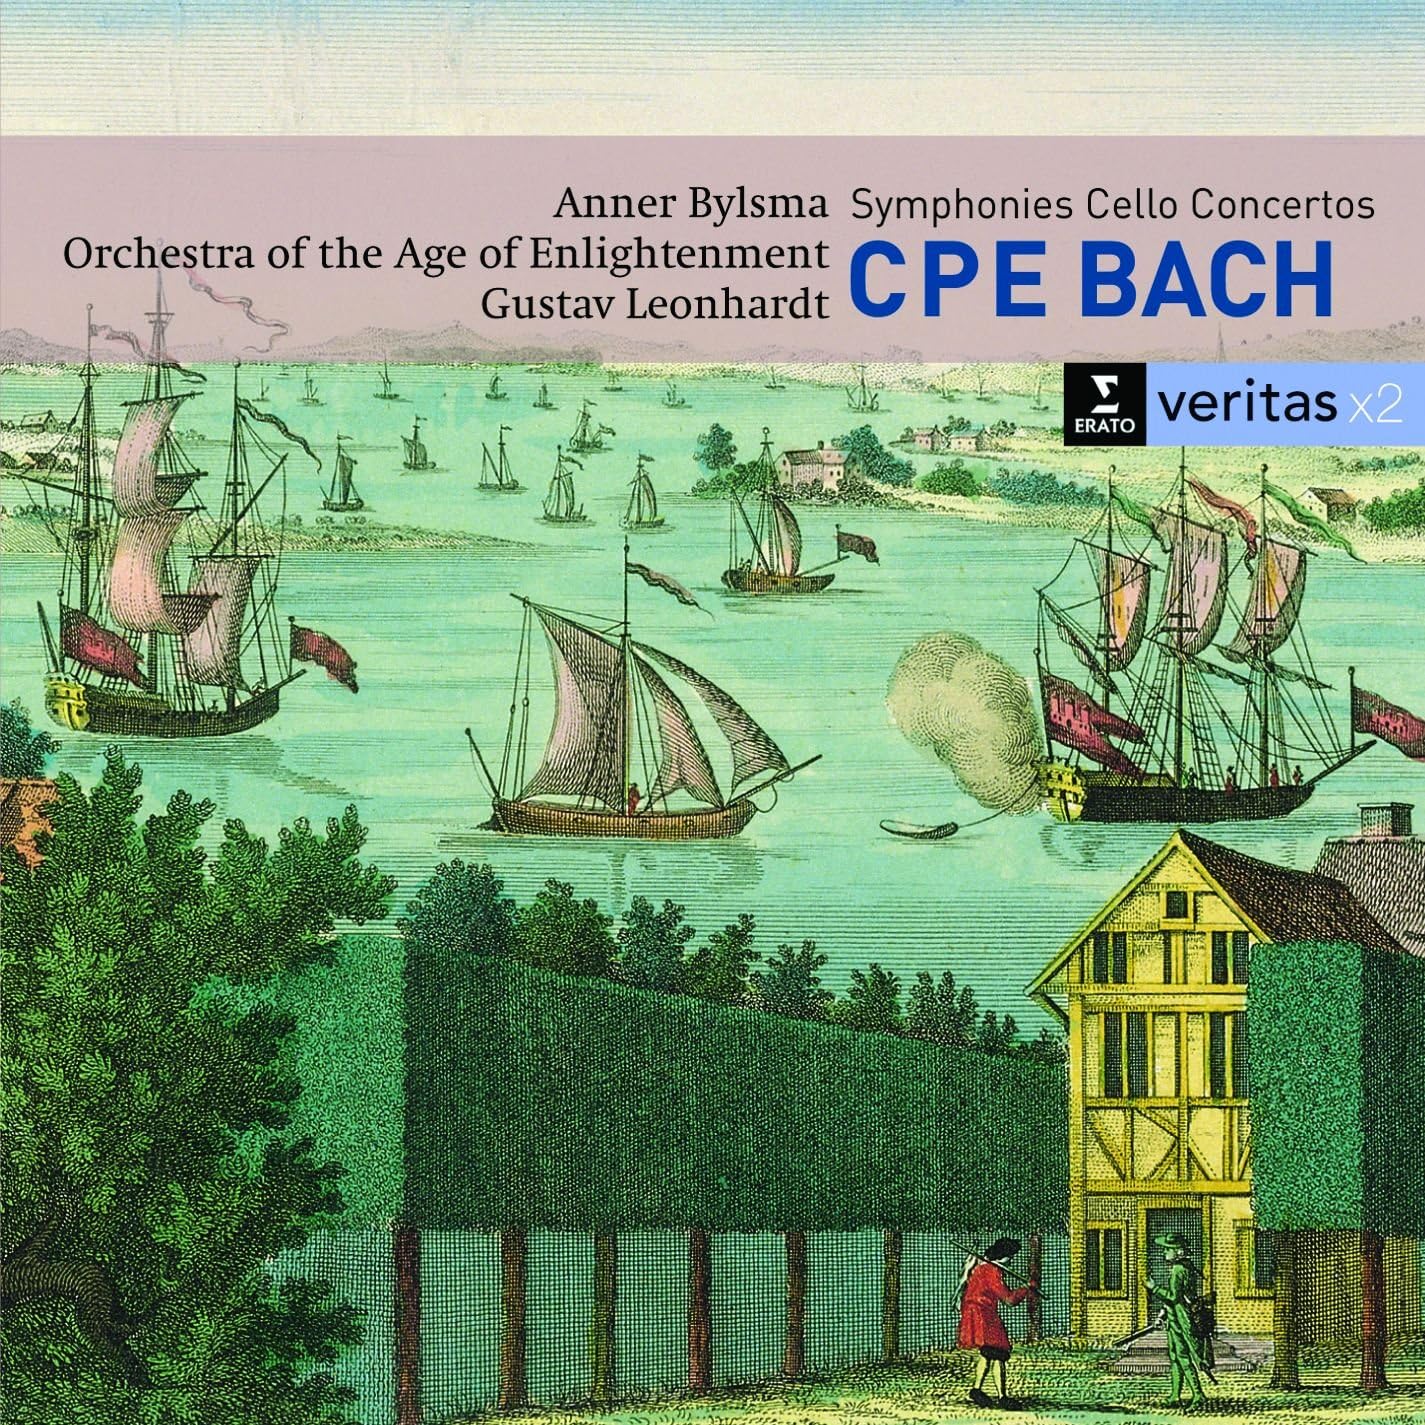 CPE Bach: Symphonies, Cello Concertos | Anner Bylsma, Orchestra Of The Age Of Enlightenment, Gustav Leonhardt